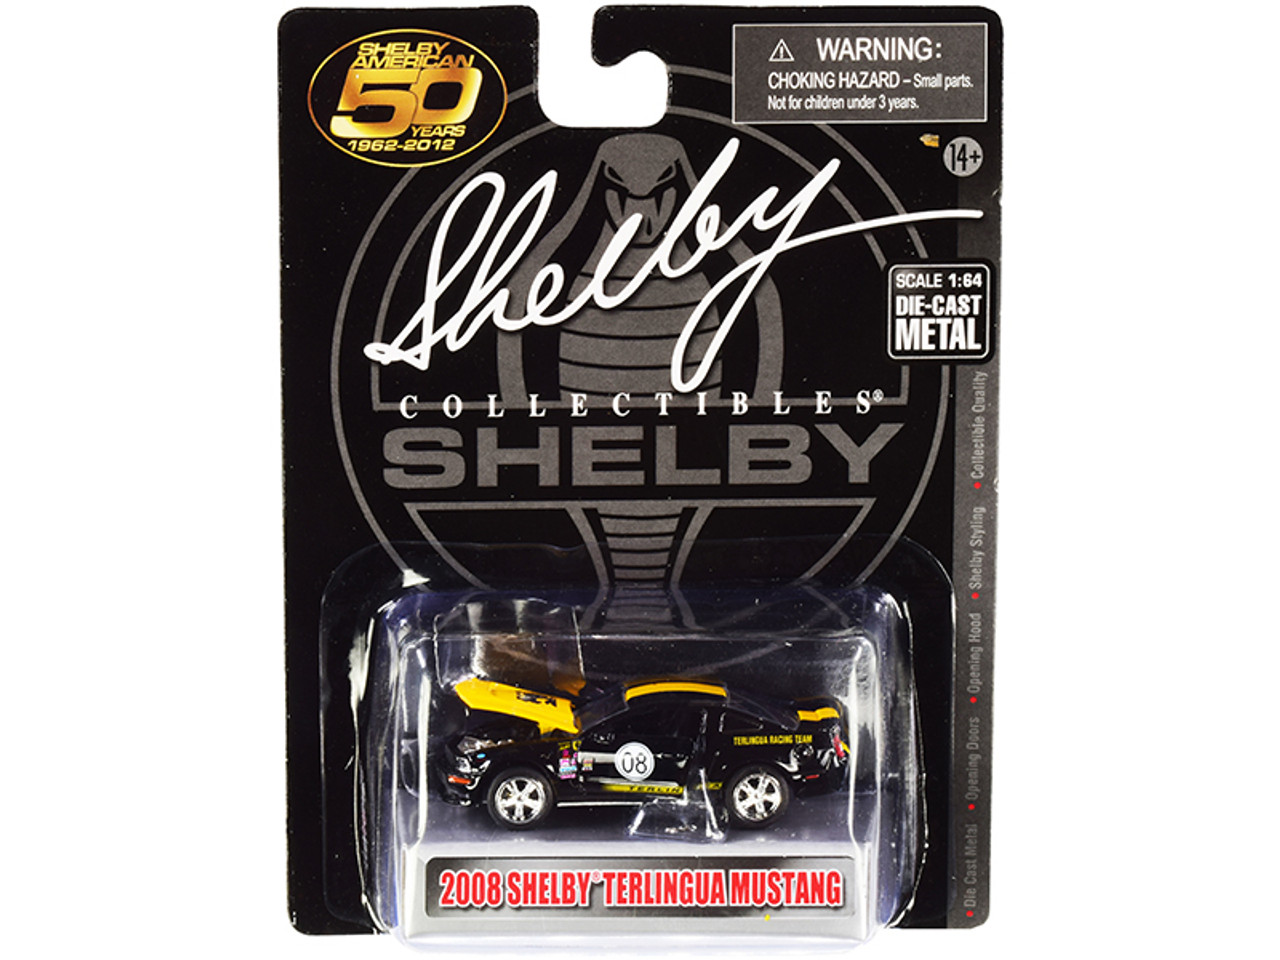 2008 Ford Shelby Mustang #08 "Terlingua" Black and Yellow "Shelby American 50 Years" (1962-2012) 1/64 Diecast Model Car by Shelby Collectibles